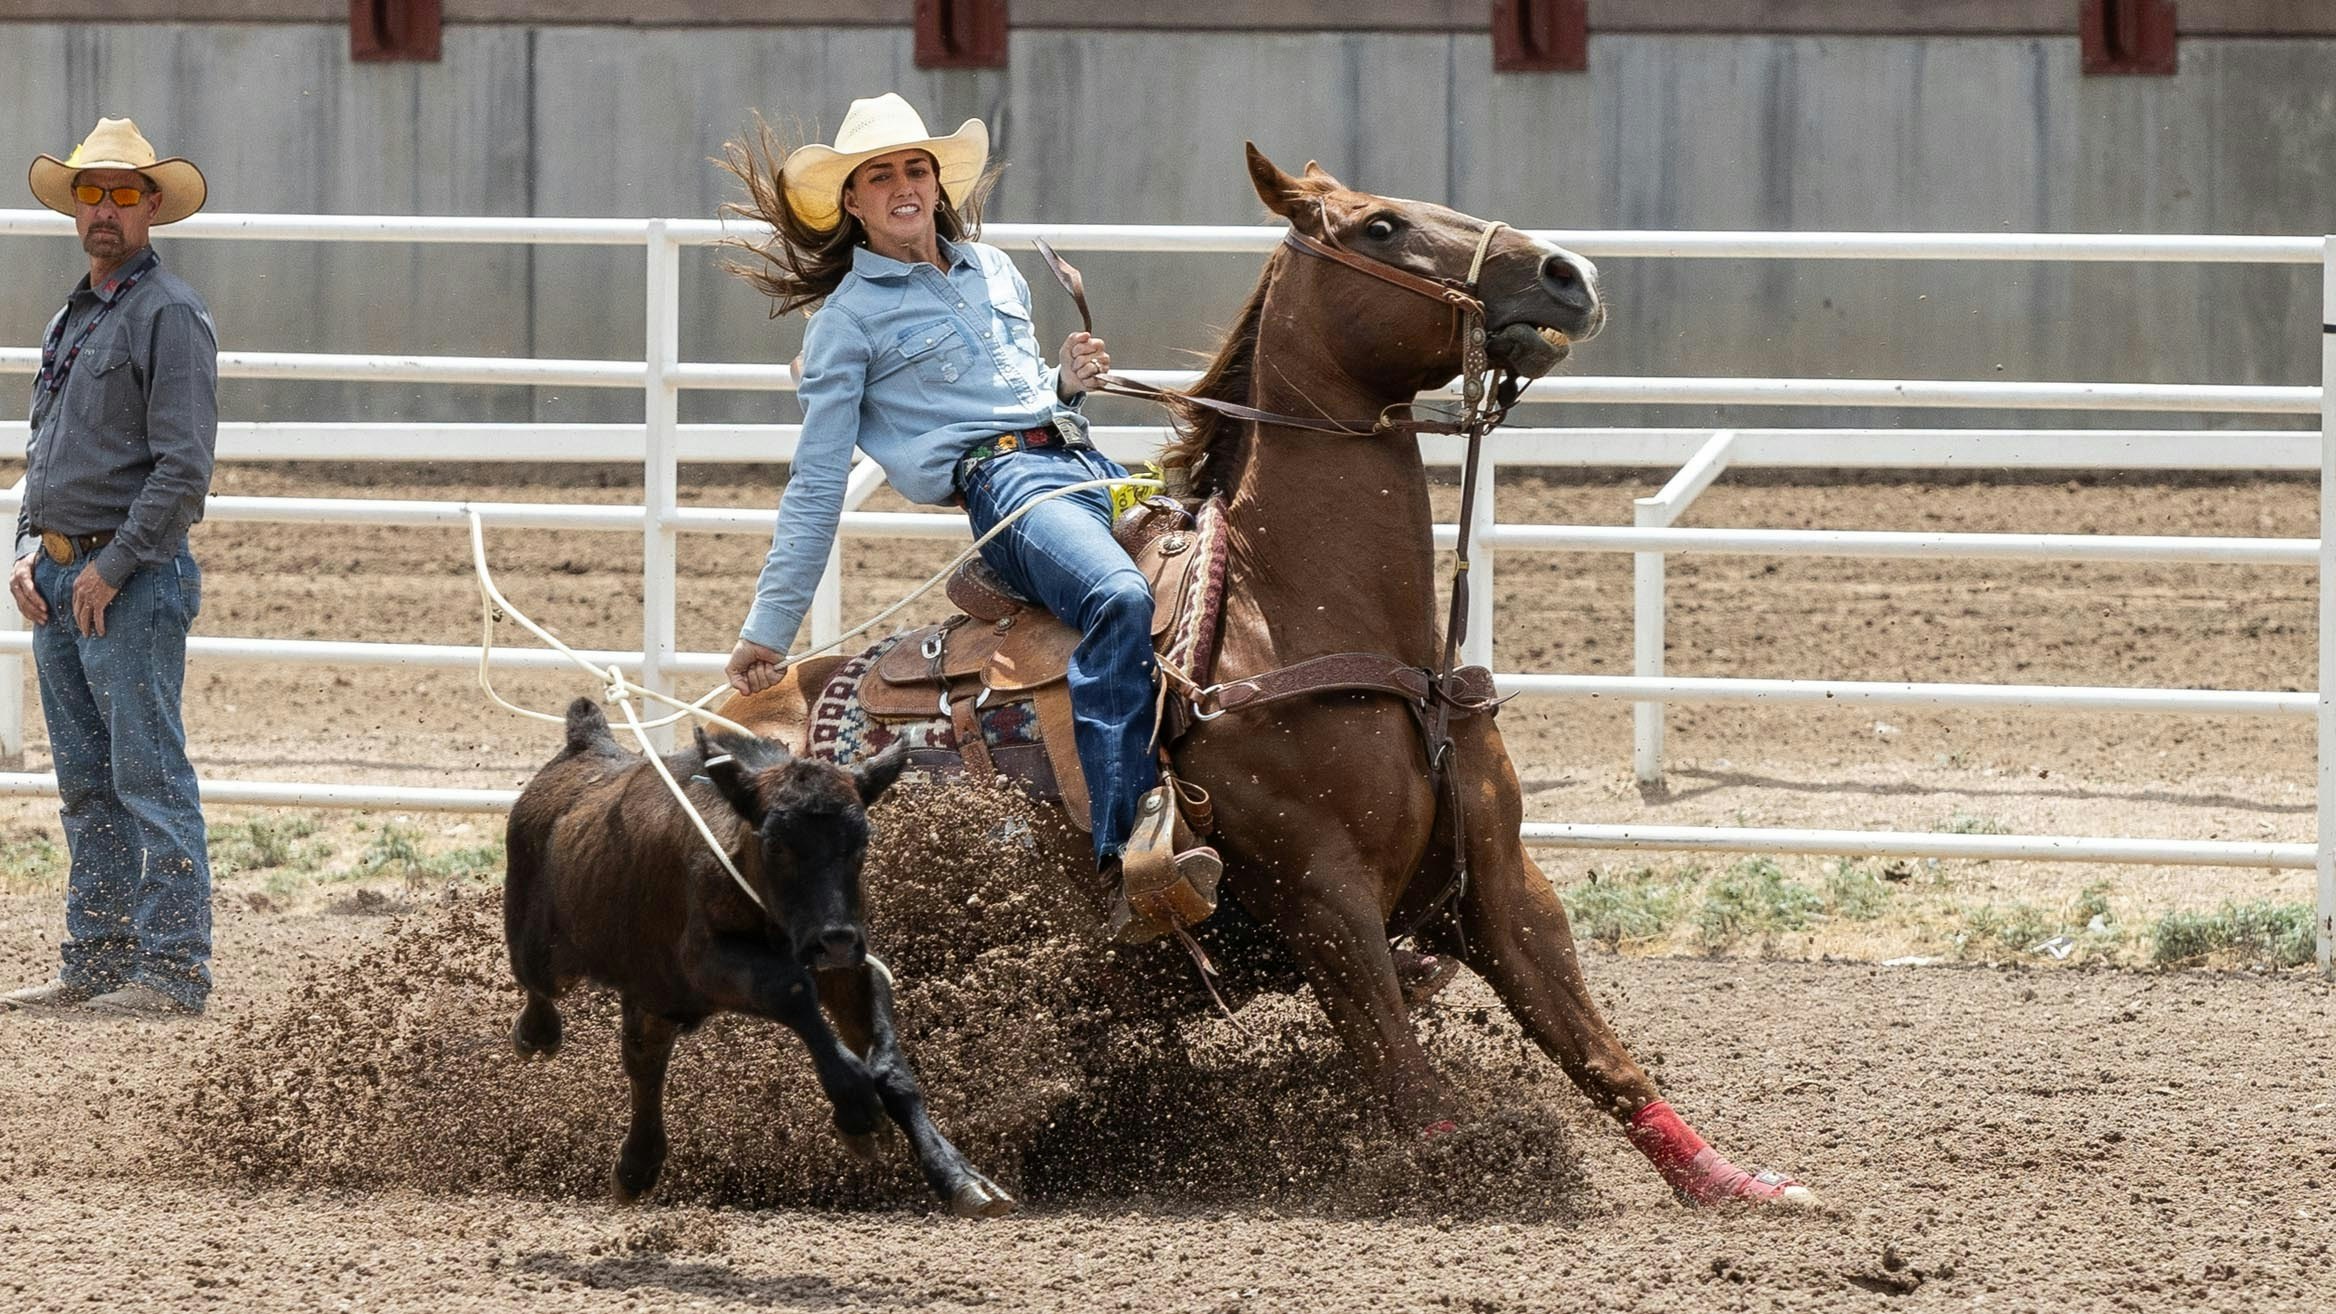 Shayla Hall from Belle Fourche, SD pulls her slack in the breakaway roping for a 4.4 second run at Cheyenne Frontier Days on July 26, 2023.